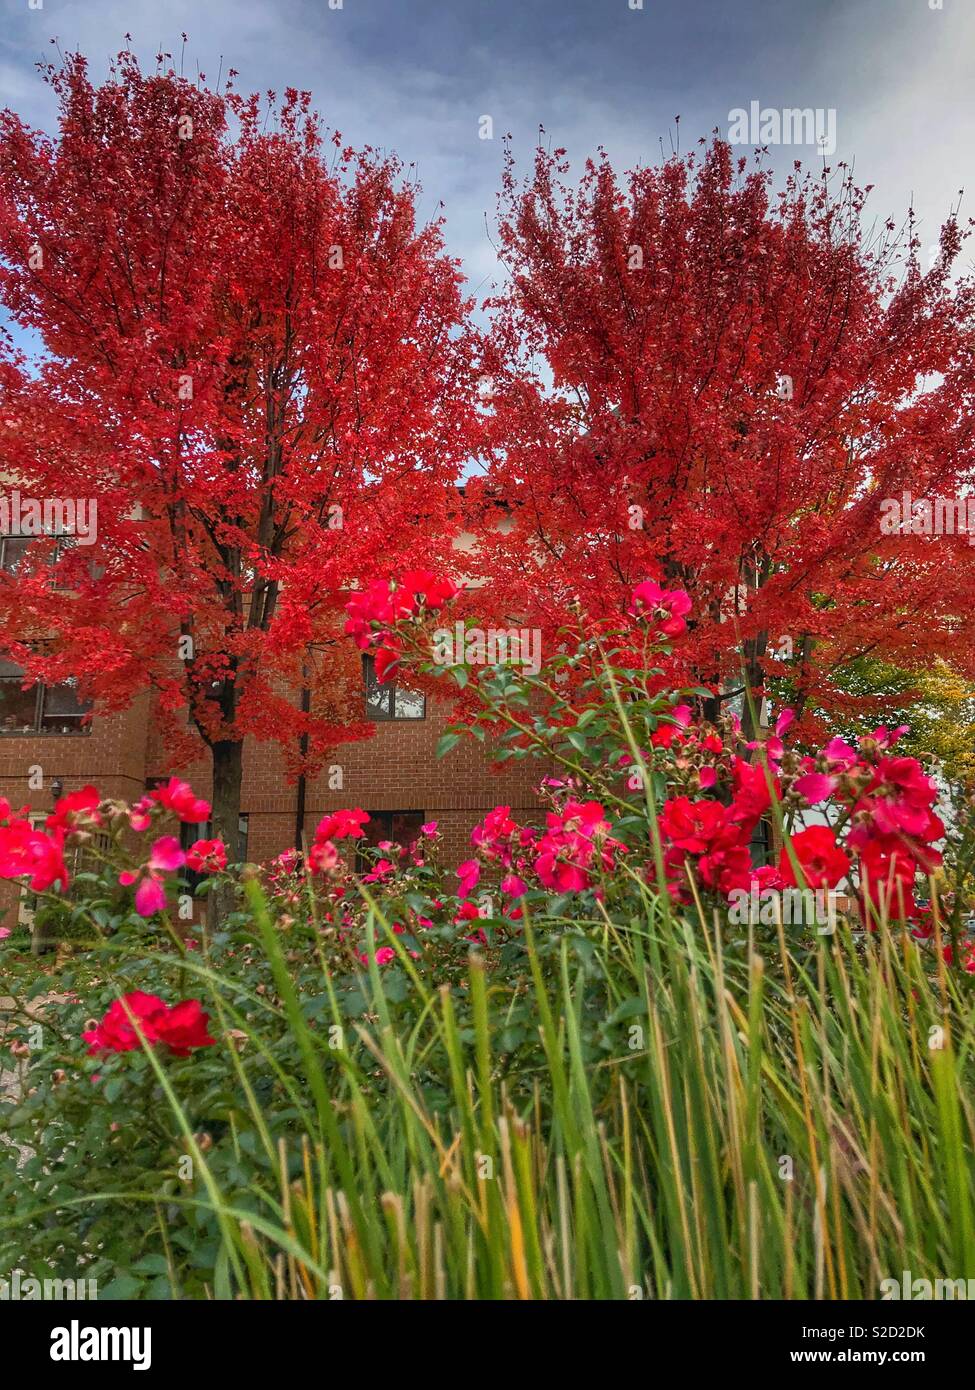 Bright red autumn leaves. Stock Photo